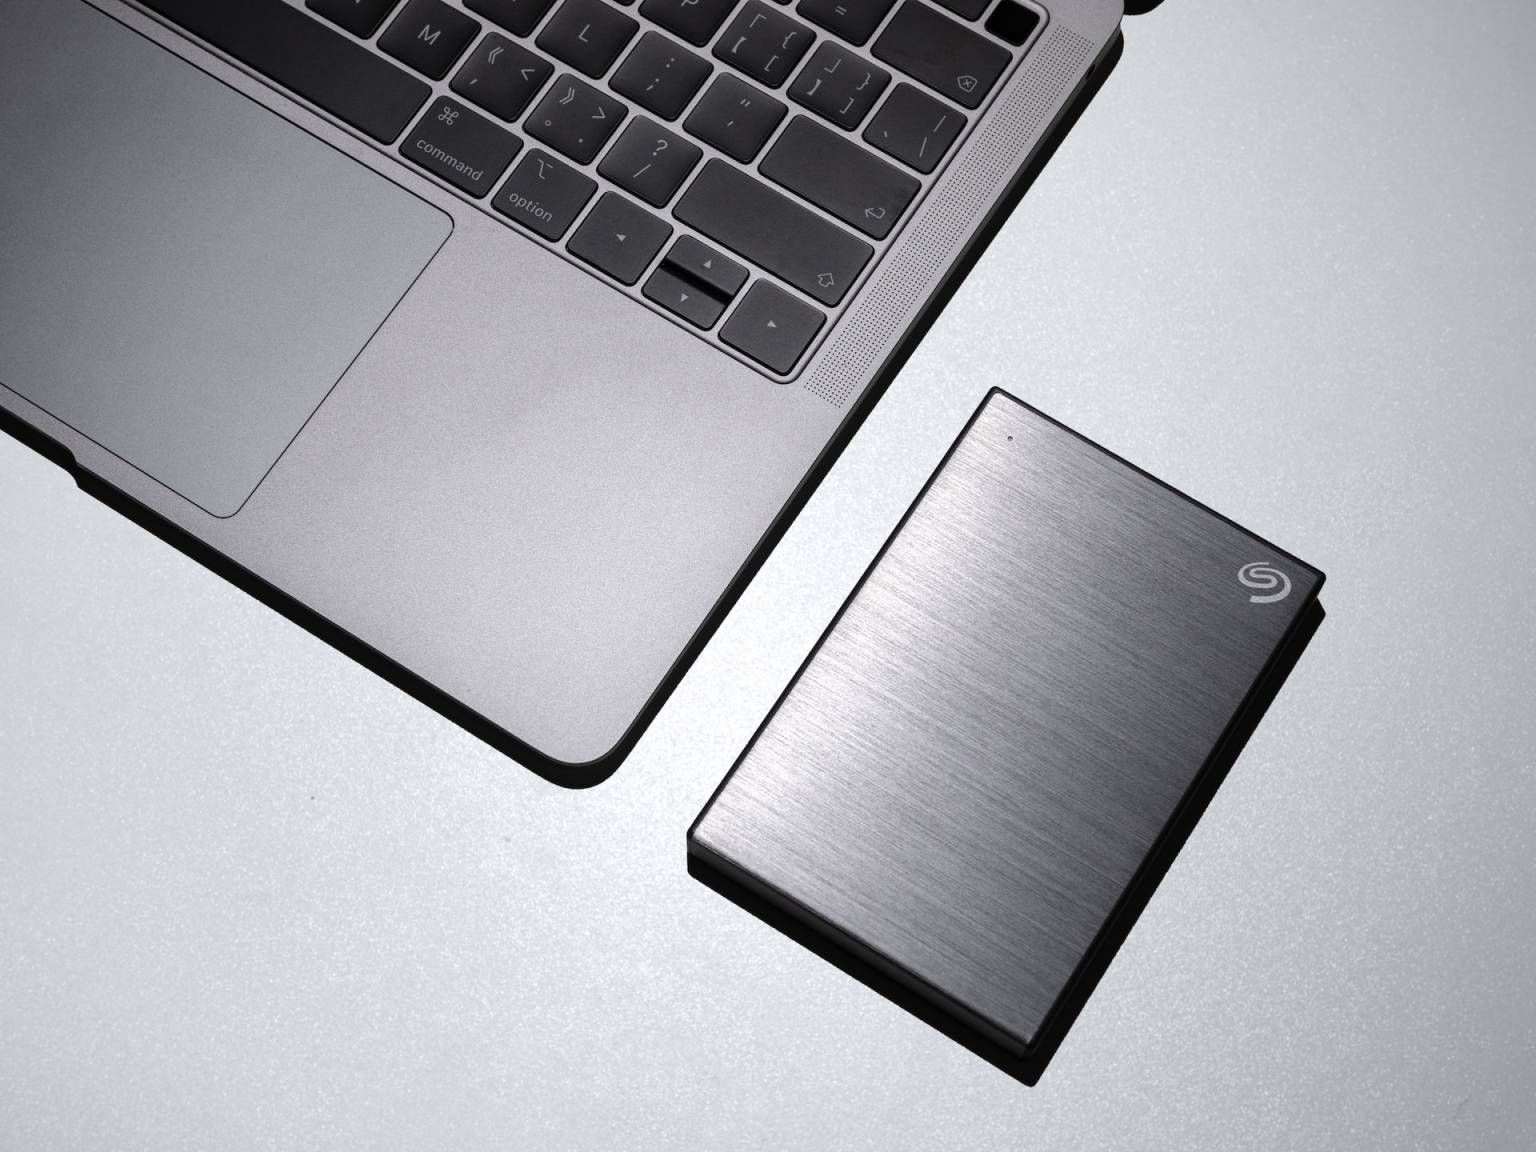 How to Open External Hard Drive on Mac